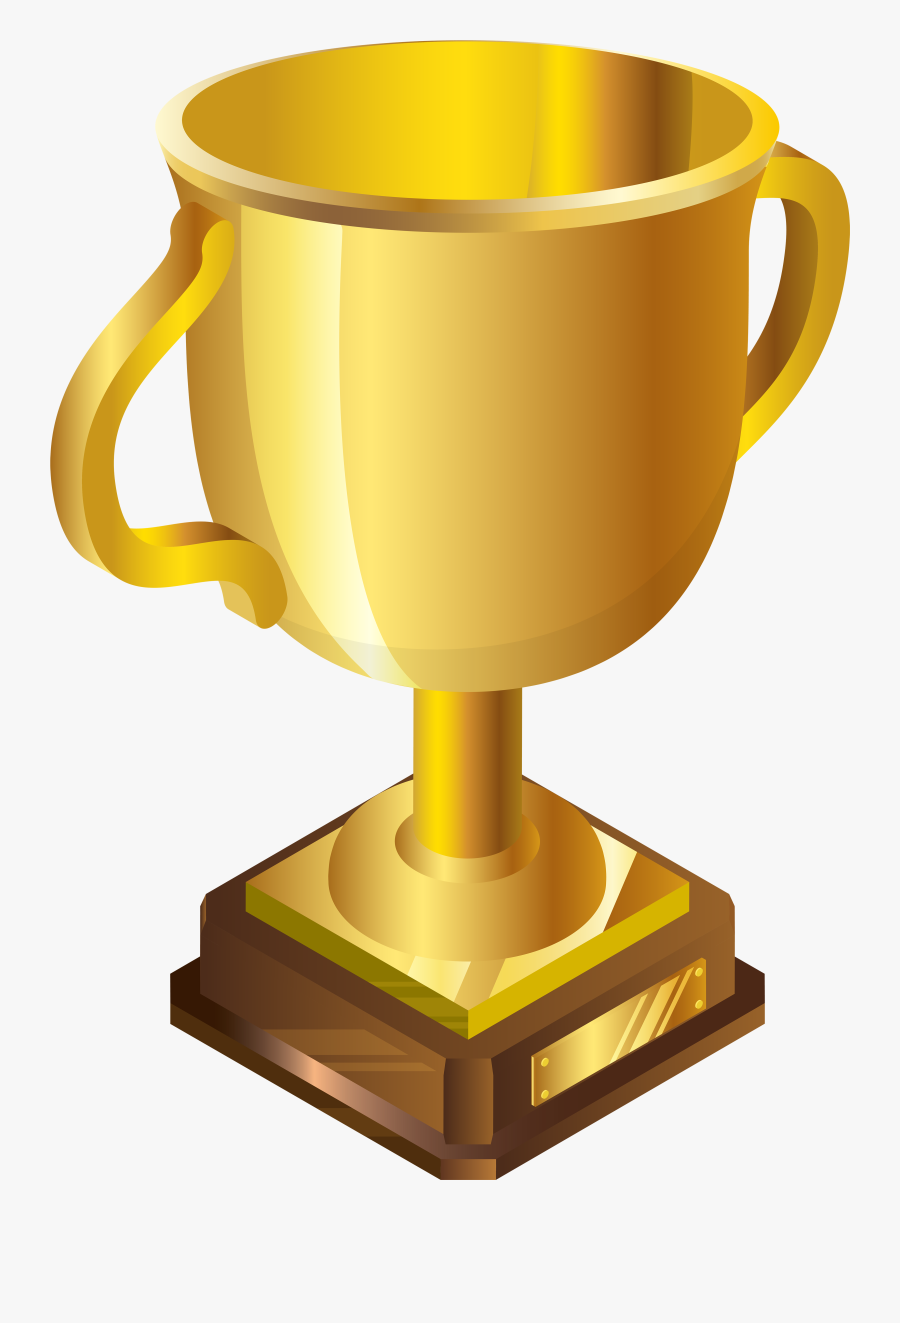 Cup Clipart At Getdrawings - 3d Golden Cup Png, Transparent Clipart